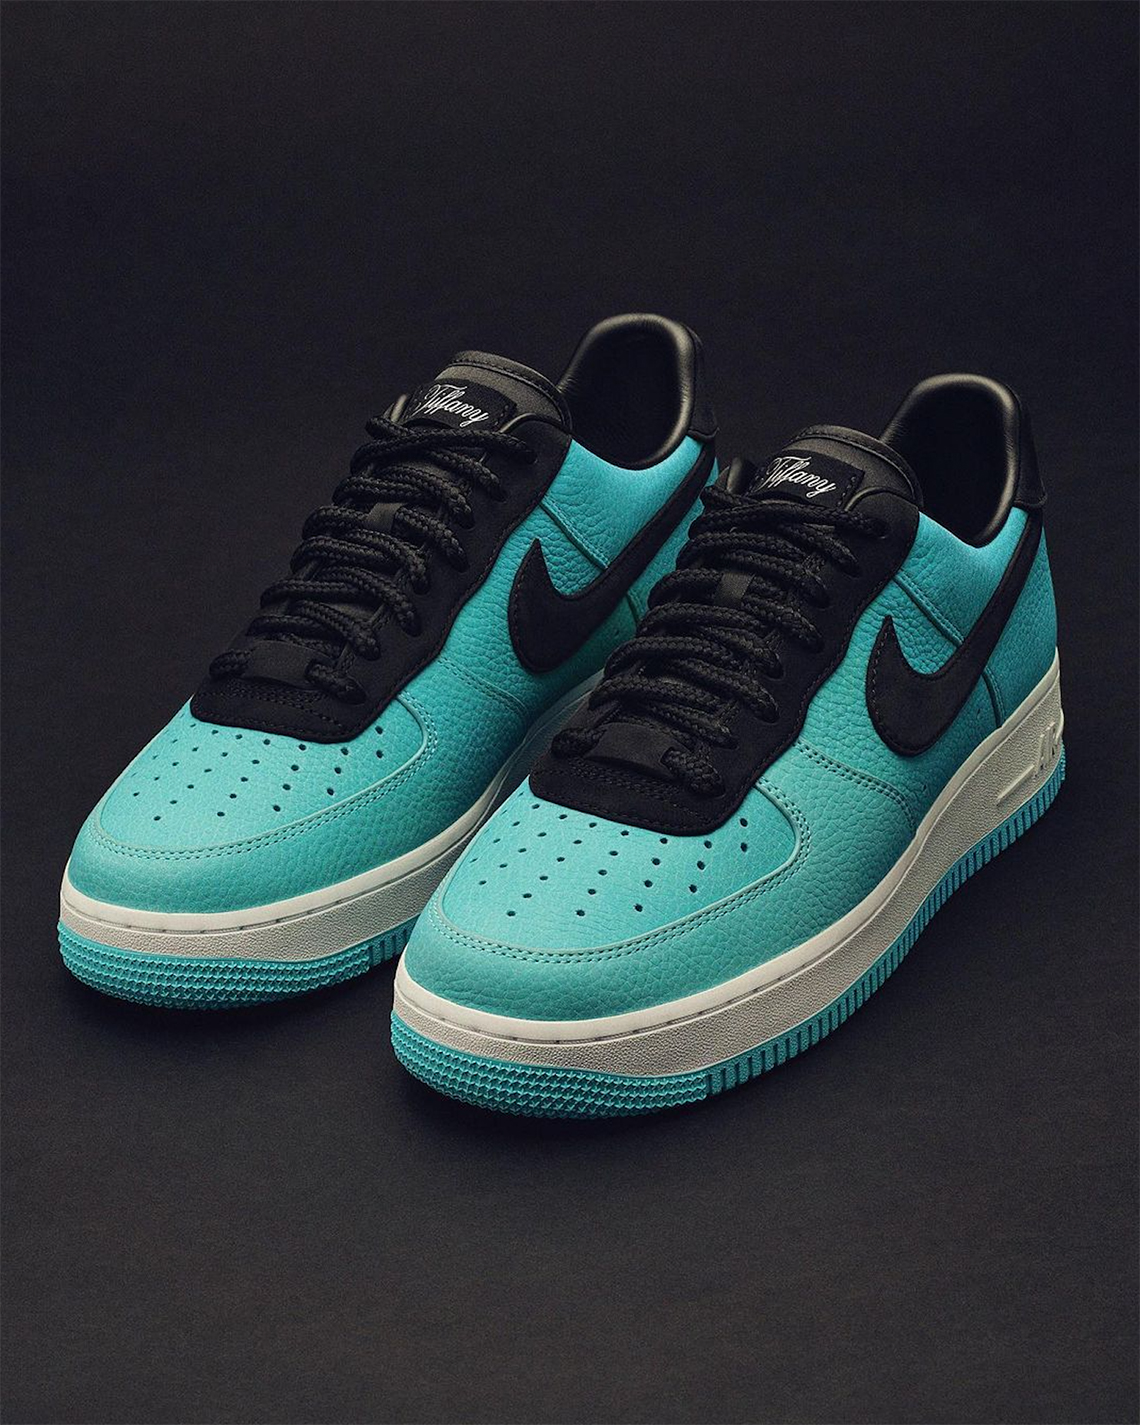 tiffany nike air force 1 friends and family blue 1